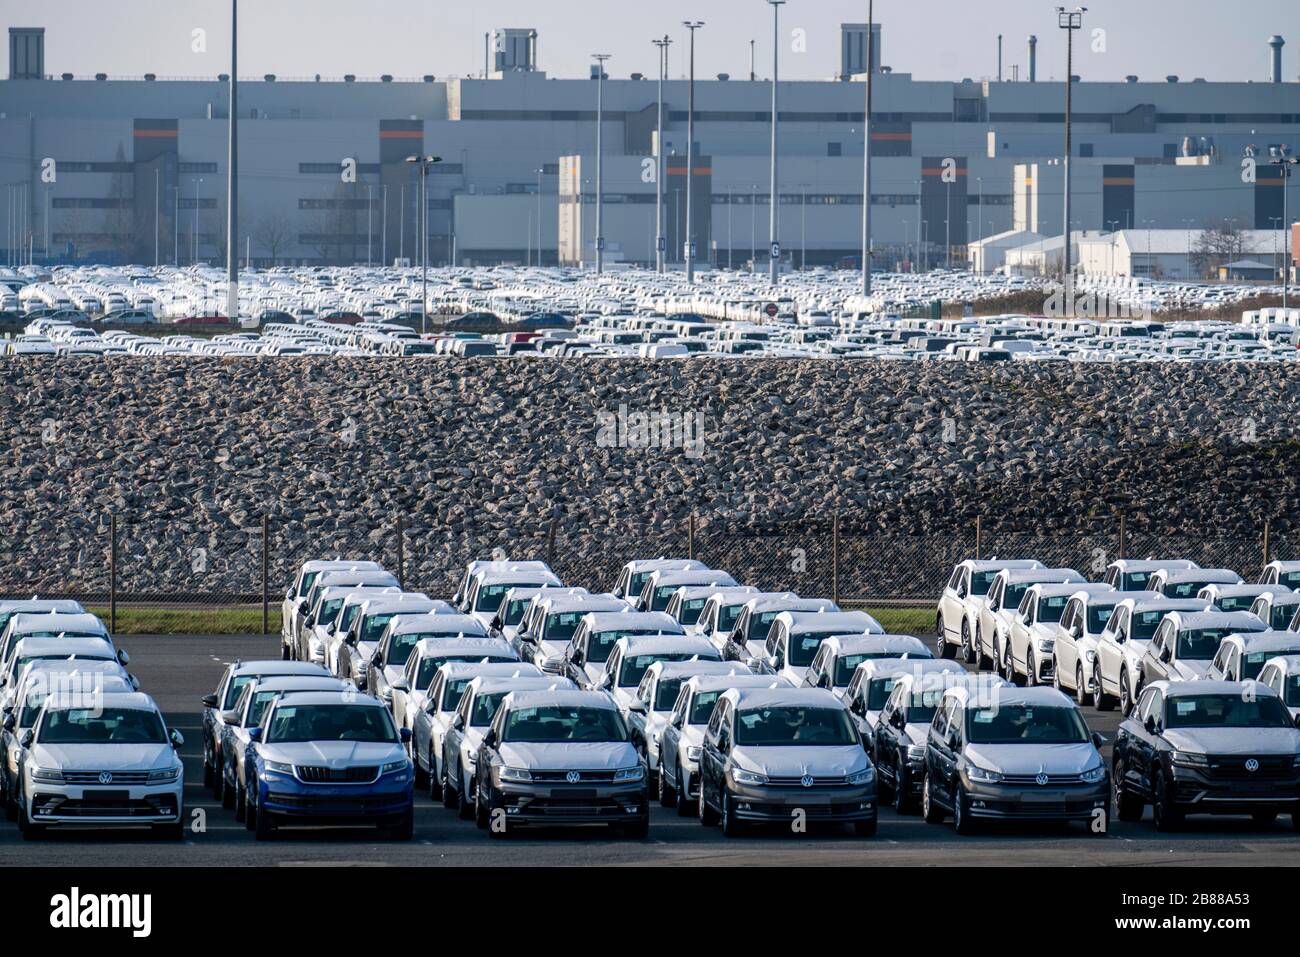 VW plant, Emden, new cars, waiting to be shipped, Lower Saxony, Germany, Stock Photo